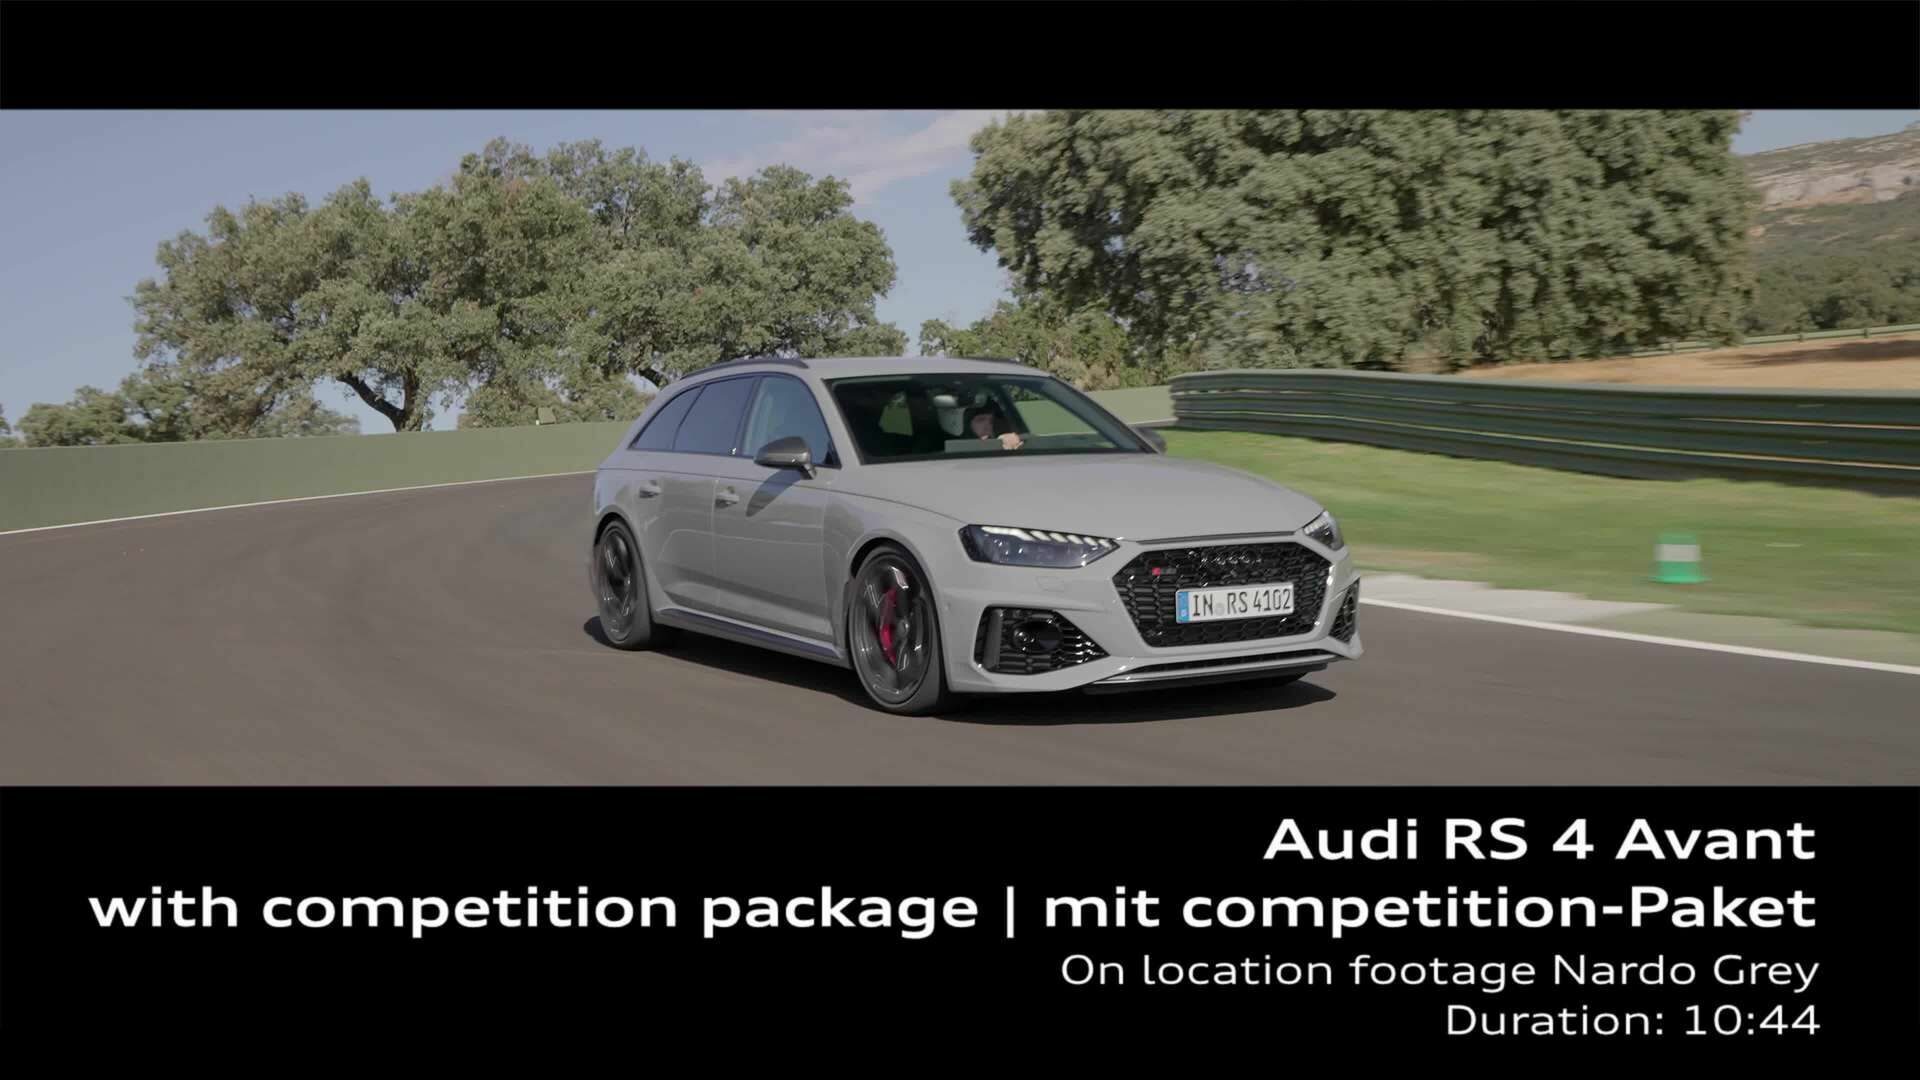 Footage: Audi RS 4 Avant with competition plus package